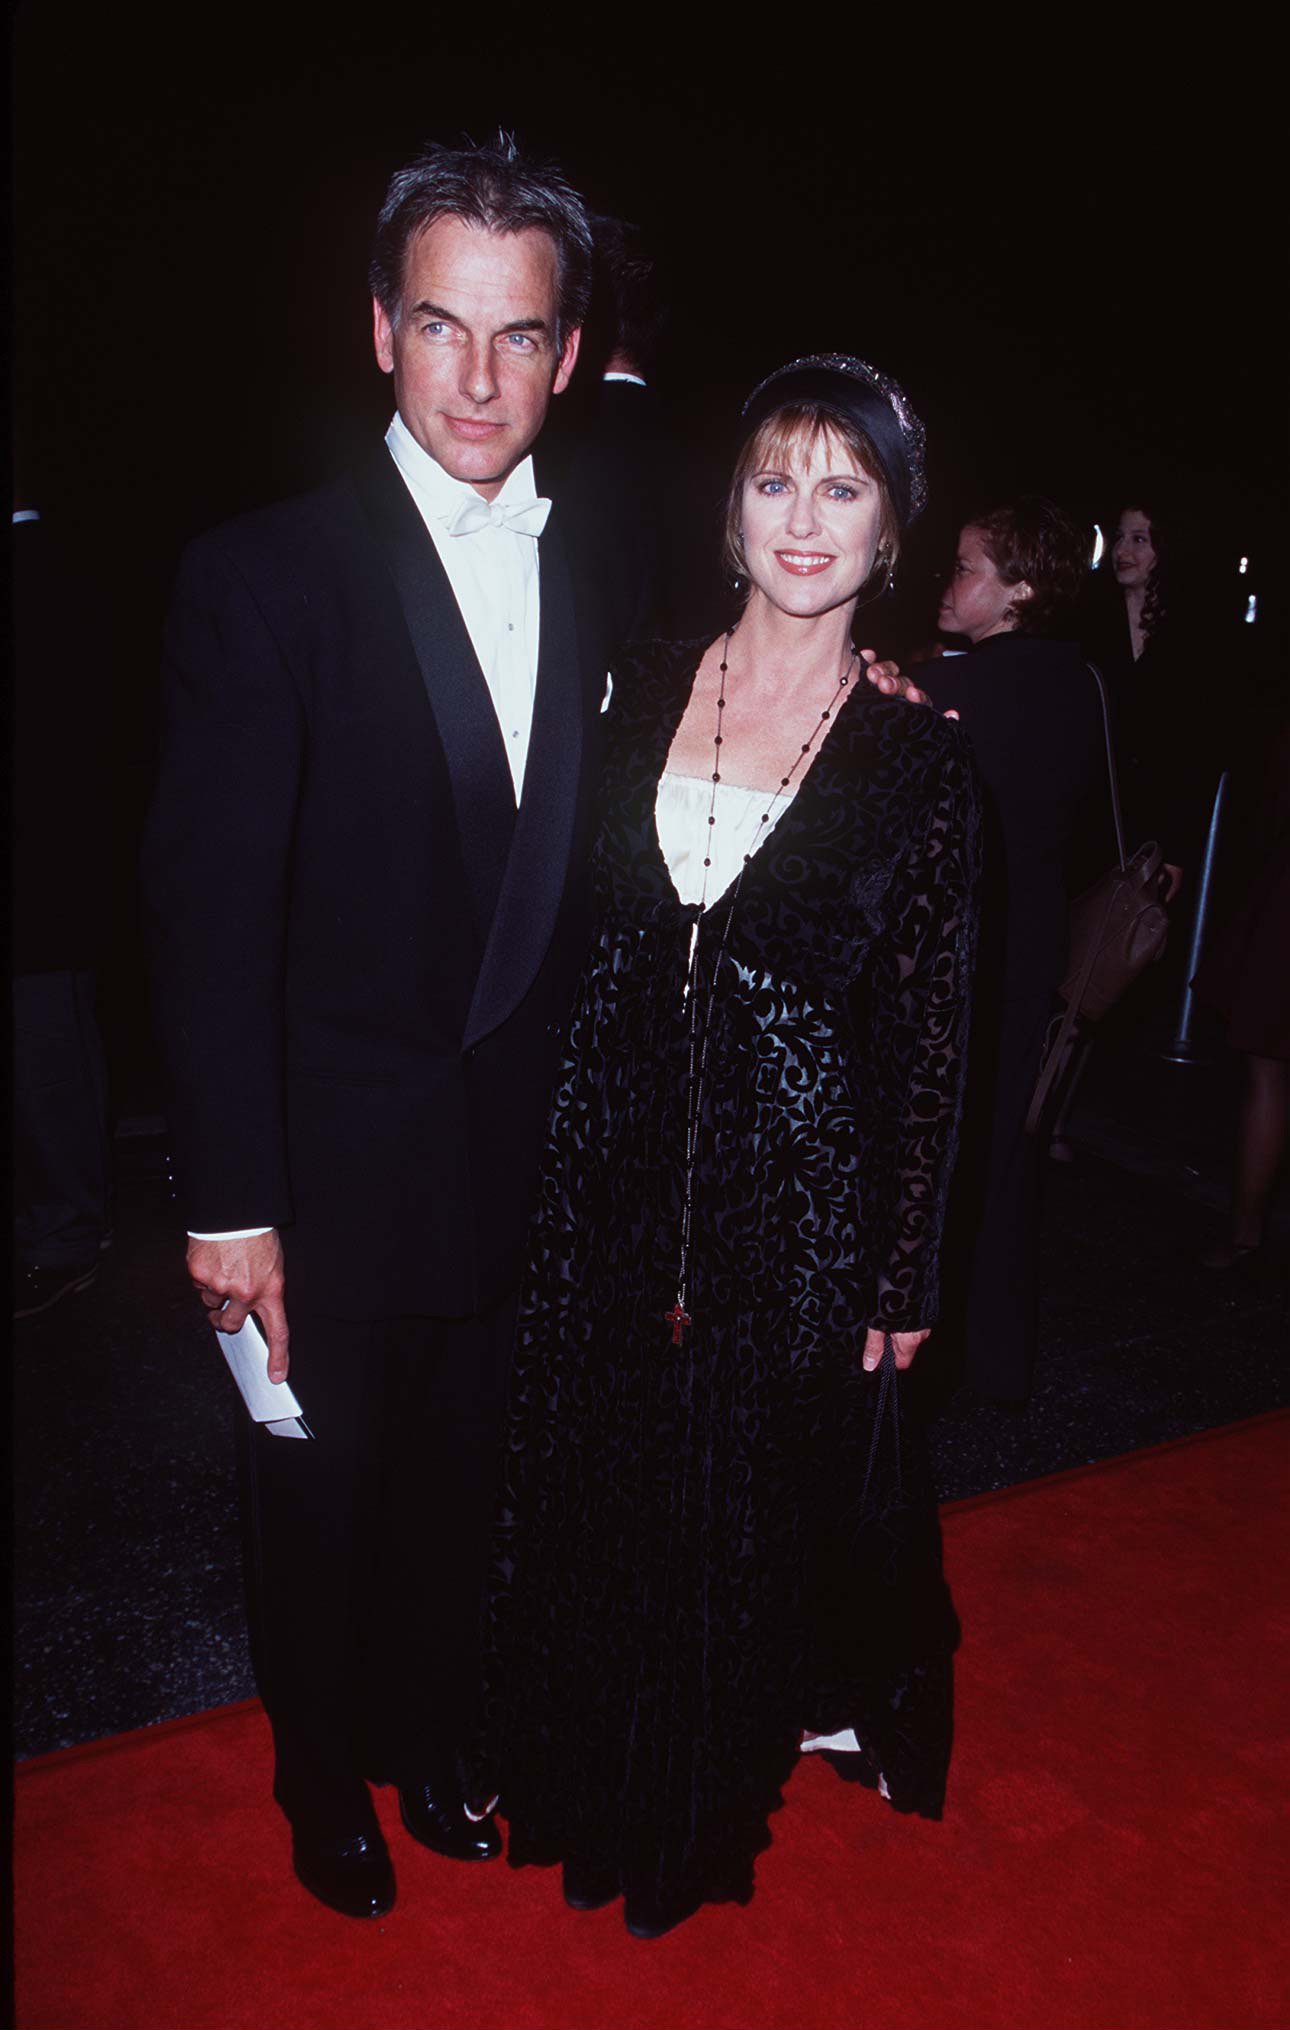 Mark Harmon & Pam Dawber at The 18th Annual Cable ACE Awards at Wiltern Theatre in Los Angeles, California, United States. | Source: Getty Images